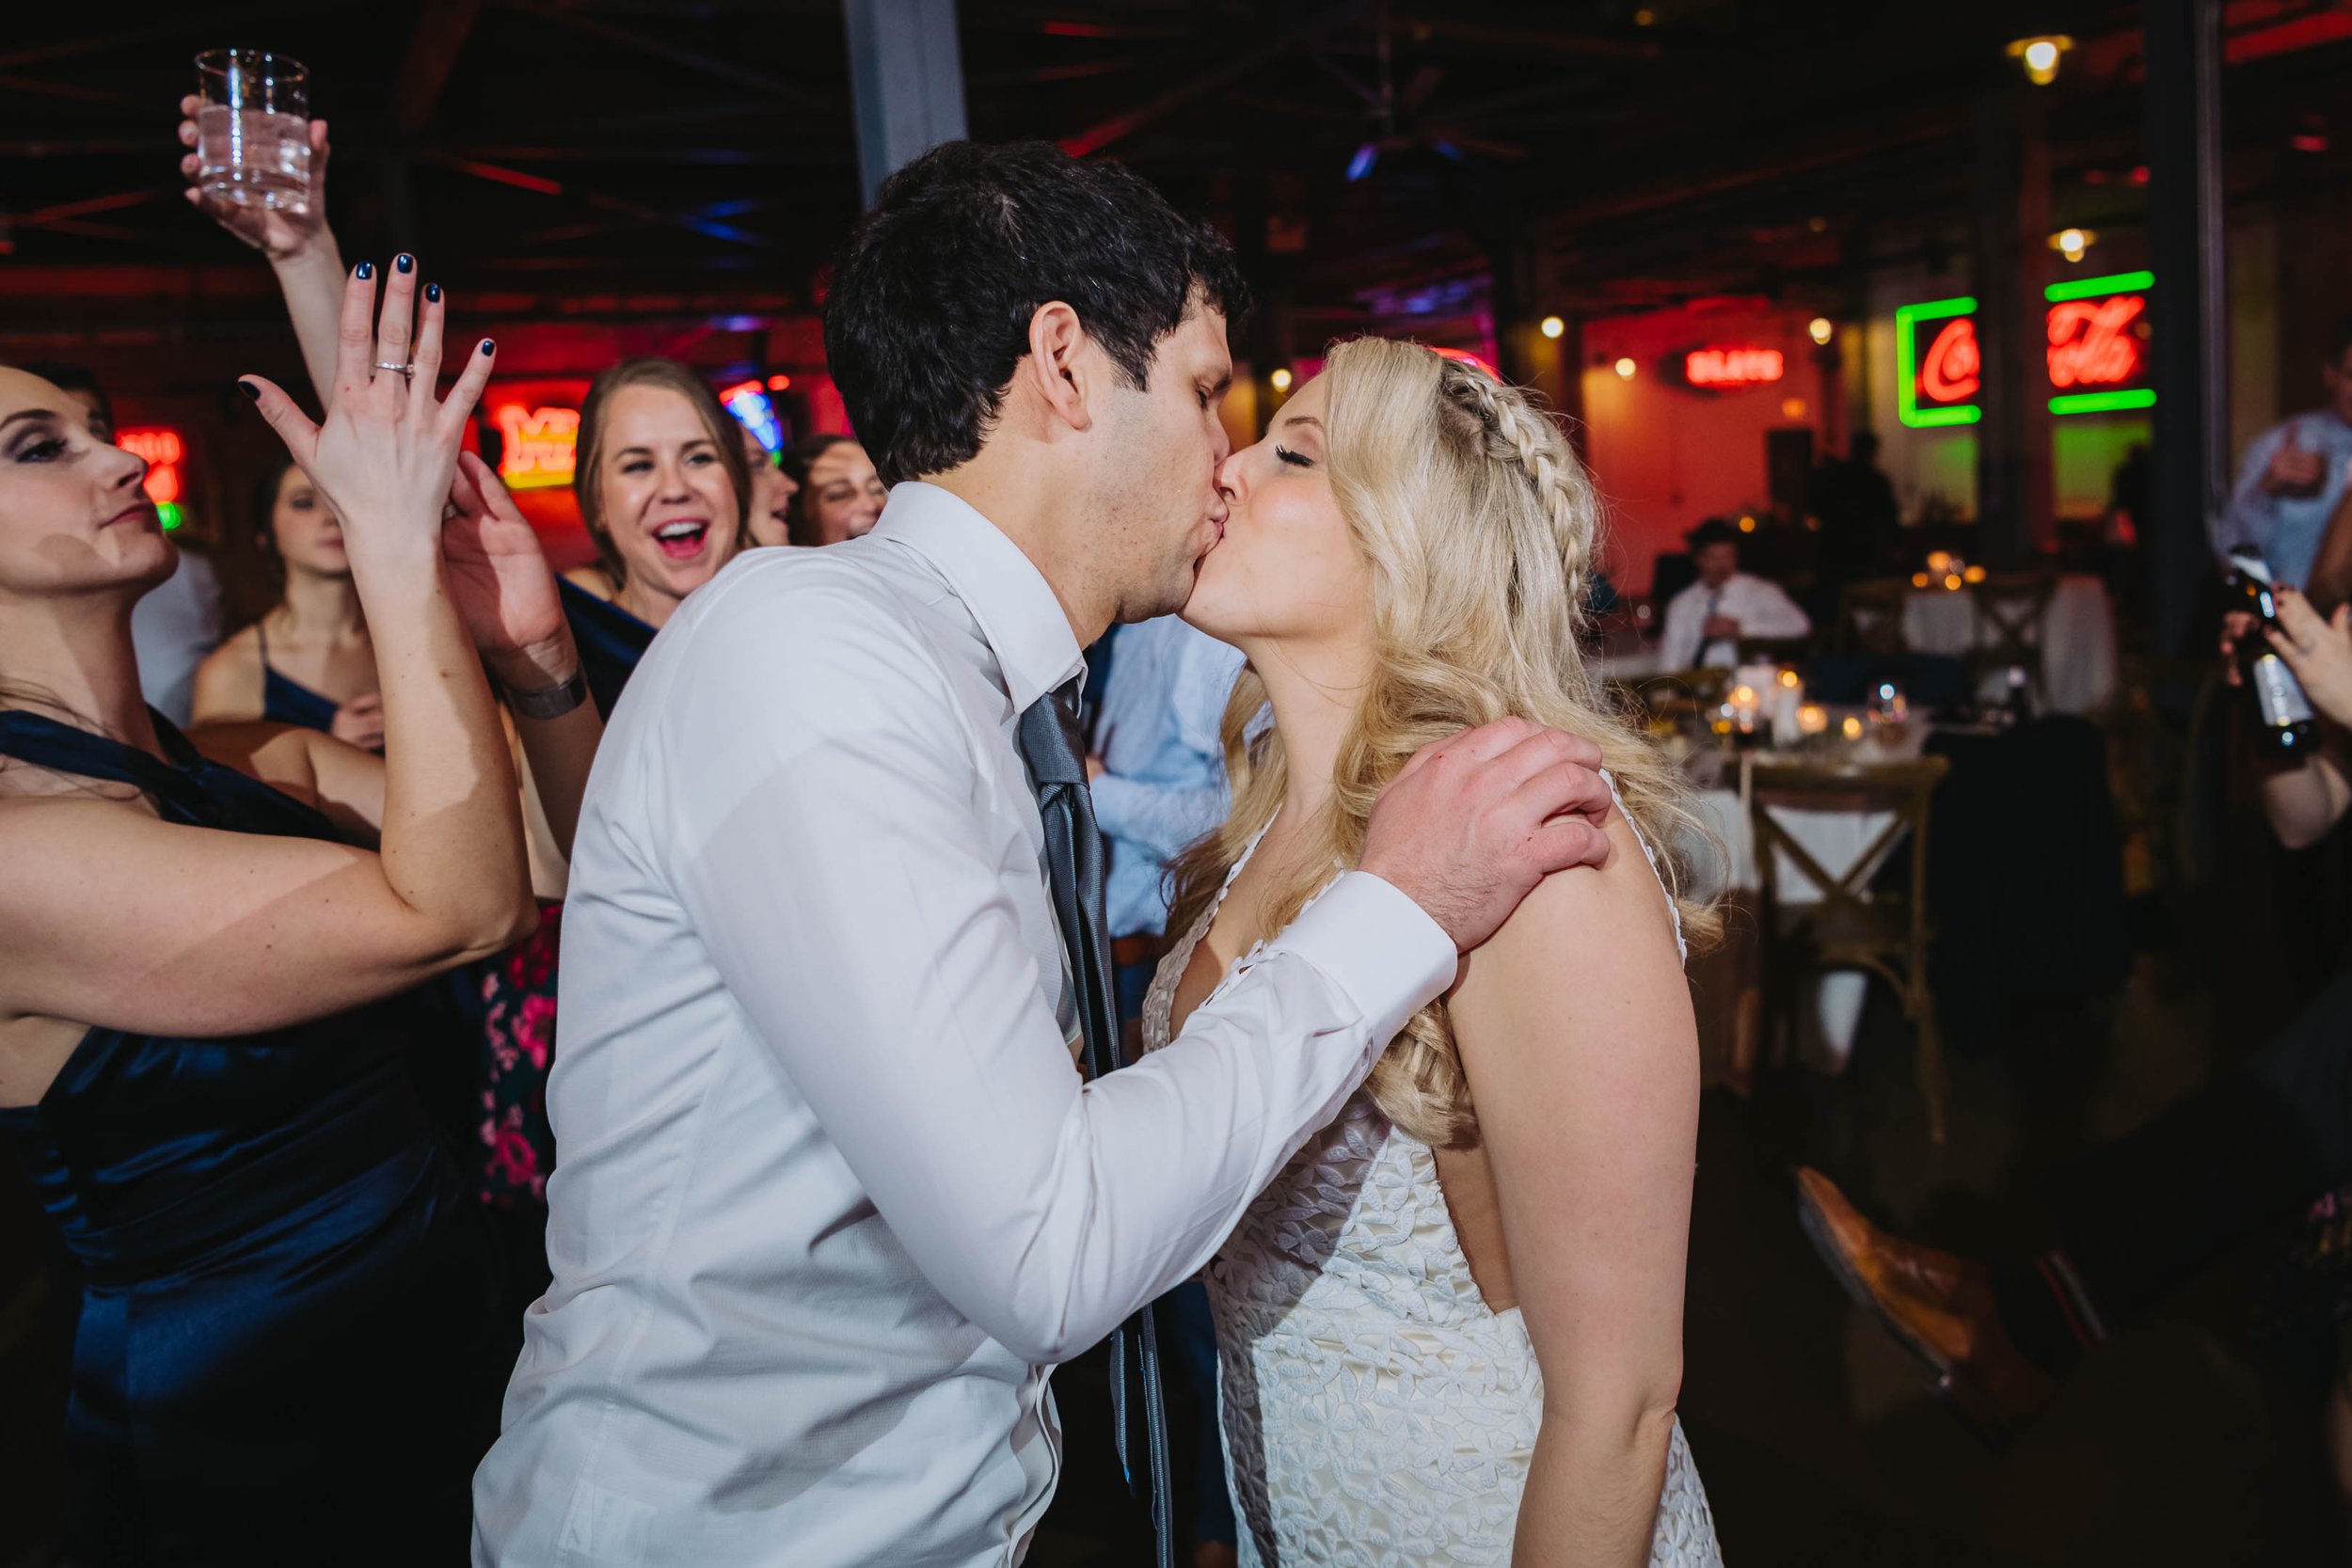 Top Wedding Photographers Near Me | Ravenswood Event Center | J. Brown Photography | bride and groom kiss dance floor